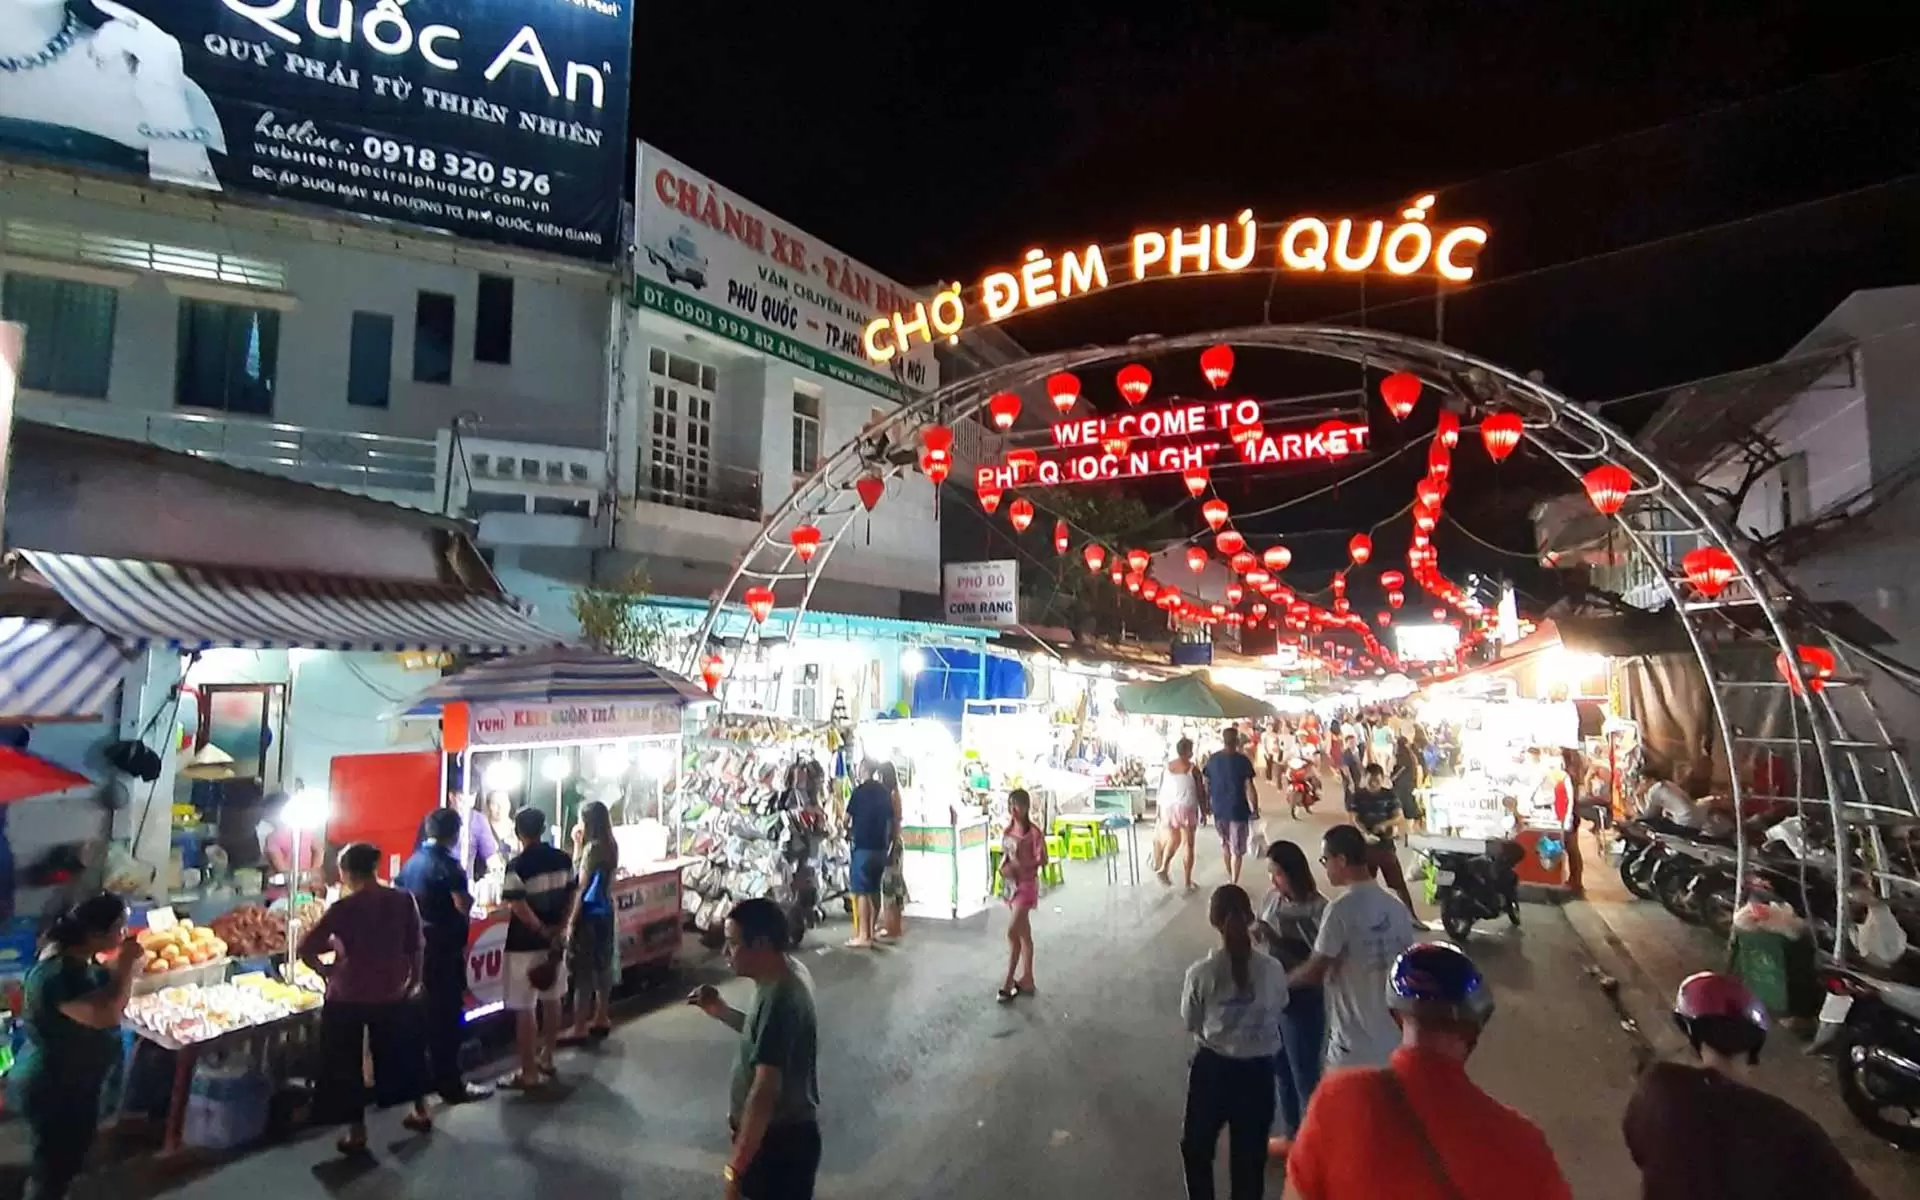 Night Markets in Phu Quoc